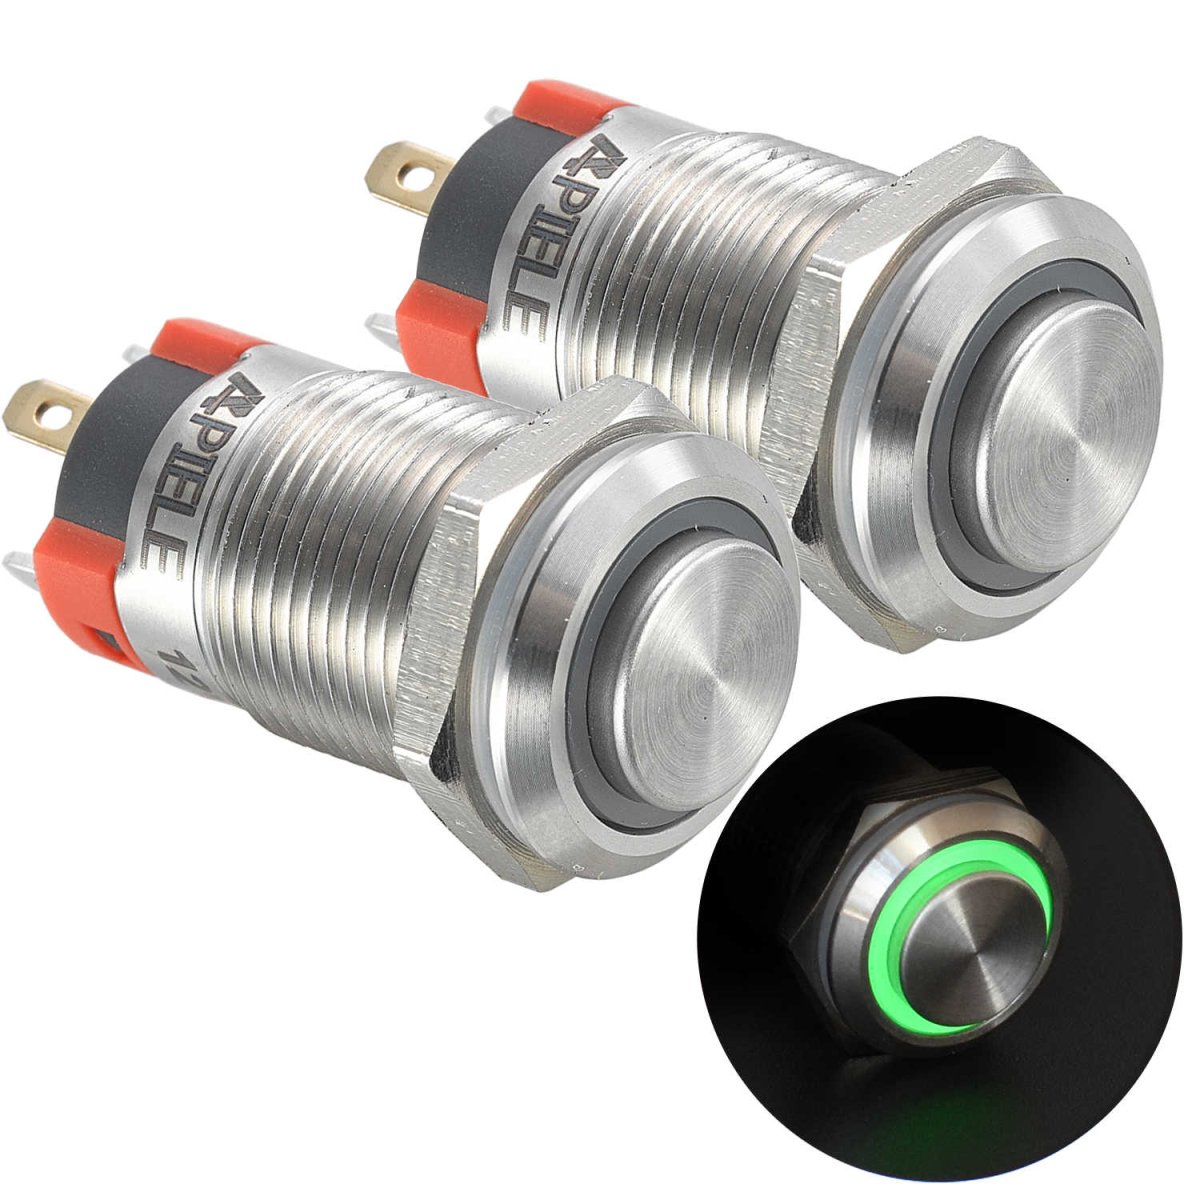 12mm Latching/Momentary Push Button Switch High Head Stainless Steel with Ring Led IP65 Waterproof (Pcs of 2) Customizable - Green-Latching